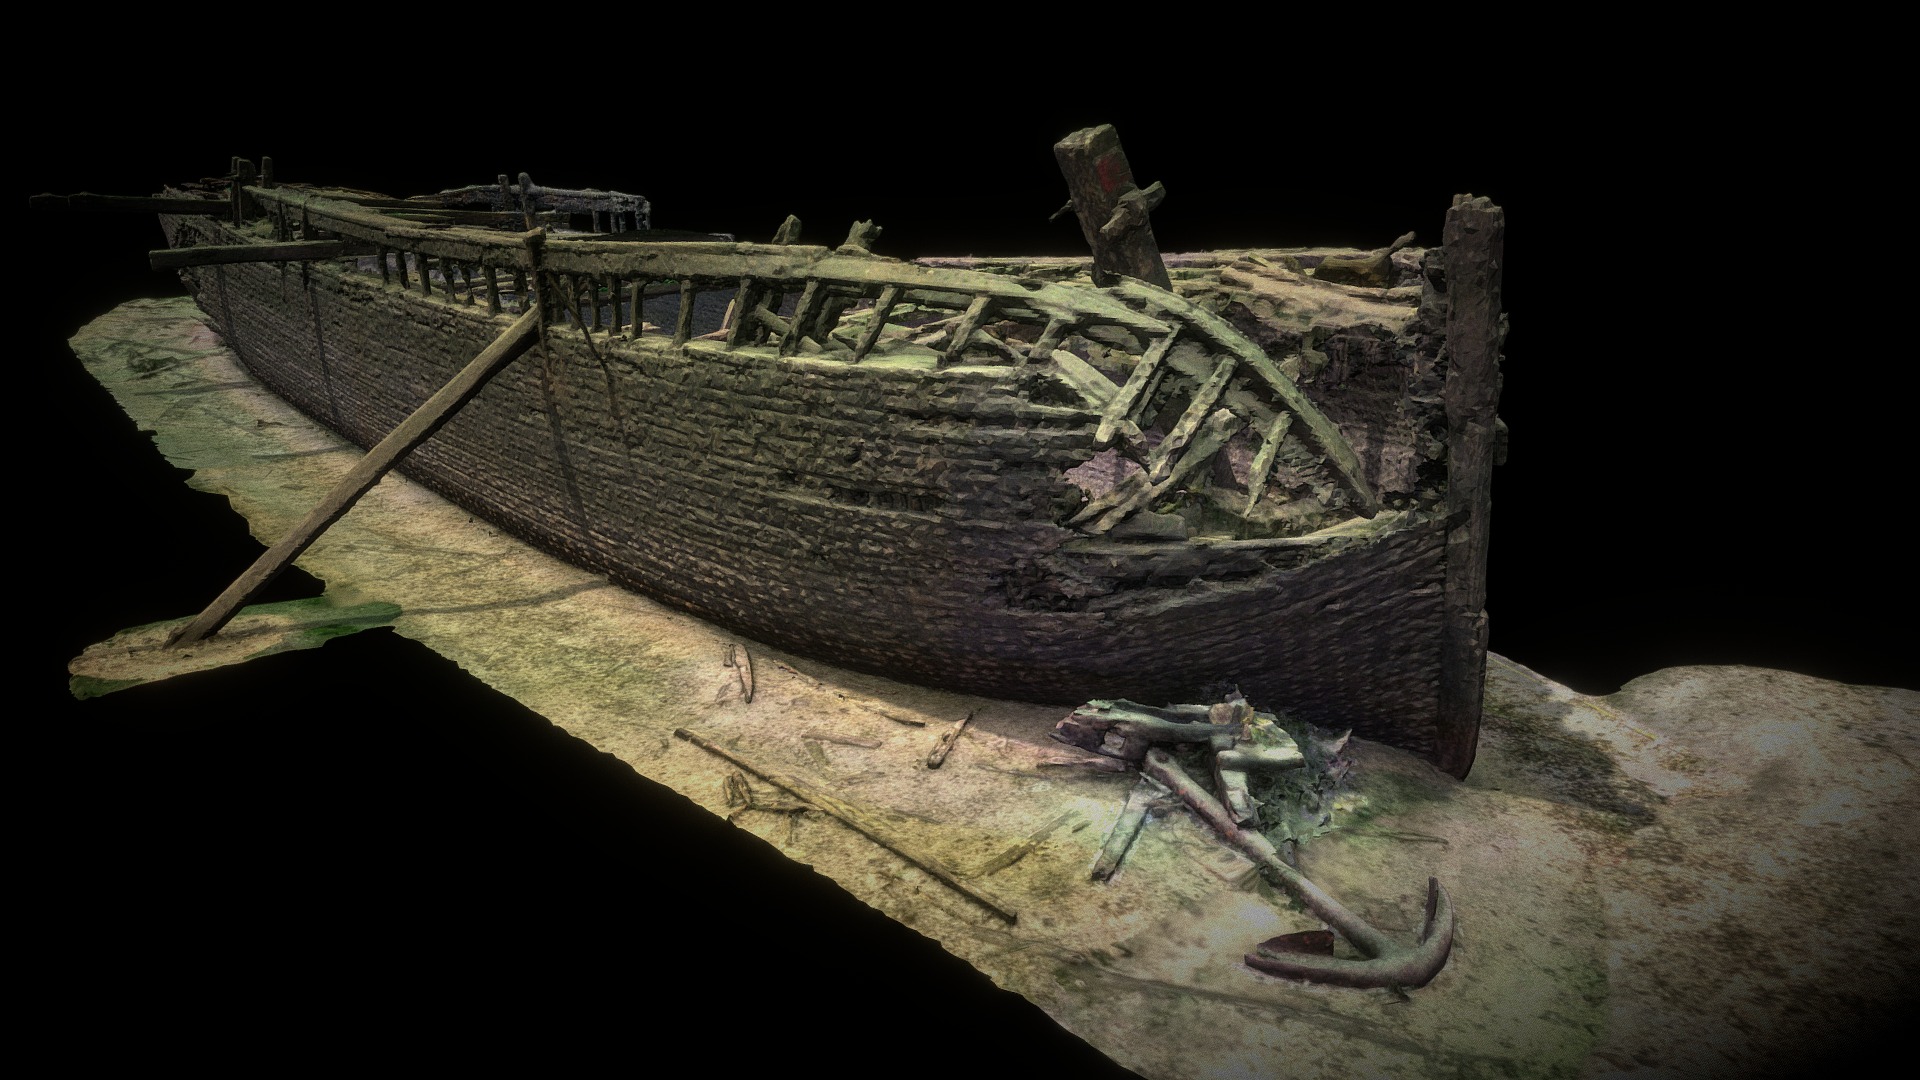 3D model Robert Gaskin wreck / exterior hull - This is a 3D model of the Robert Gaskin wreck / exterior hull. The 3D model is about a group of wooden pieces on a surface.